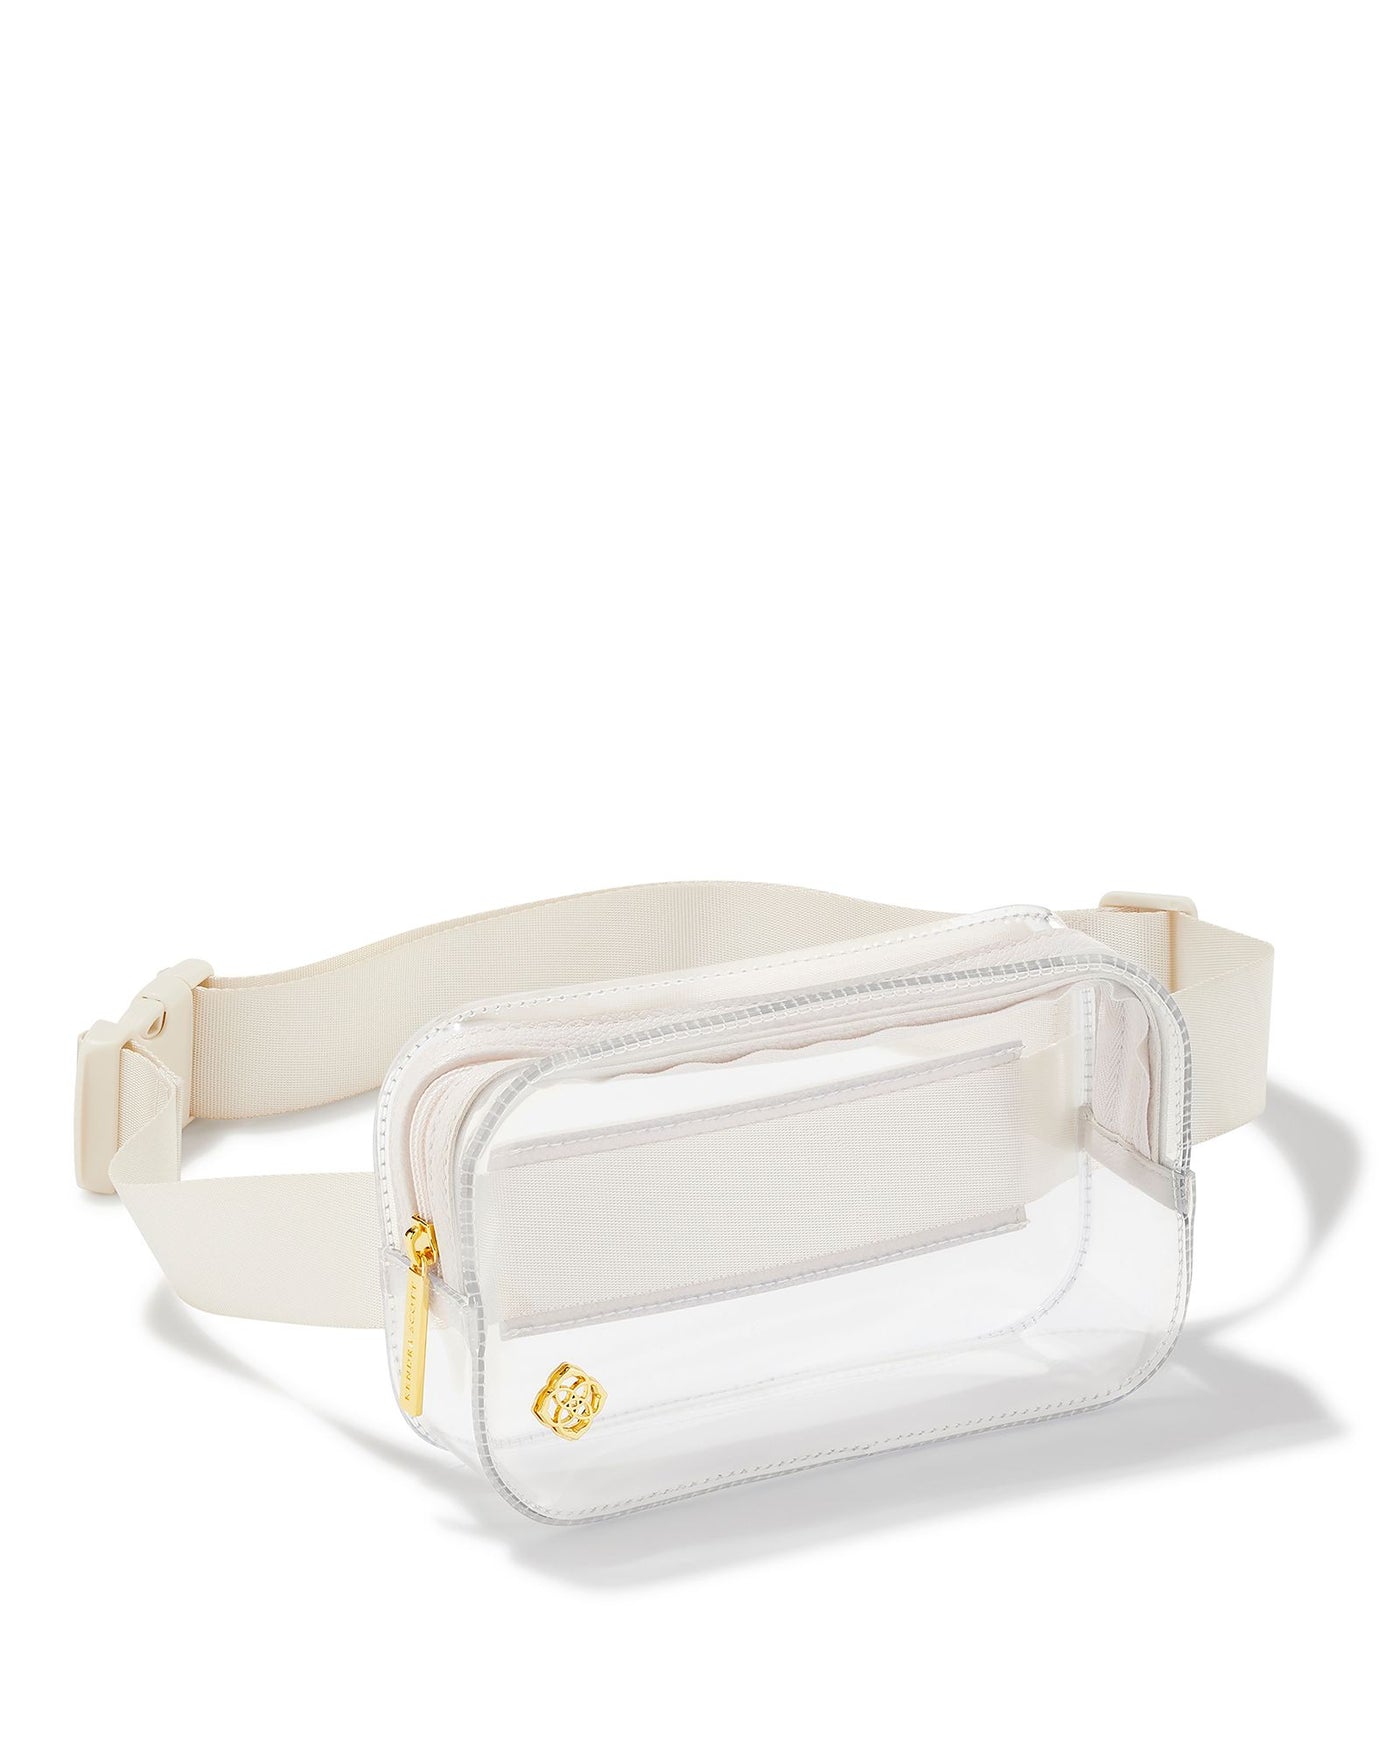 Kendra Scott Clear Belt Bag-Handbags-Kendra Scott-Market Street Nest, Fashionable Clothing, Shoes and Home Décor Located in Mabank, TX